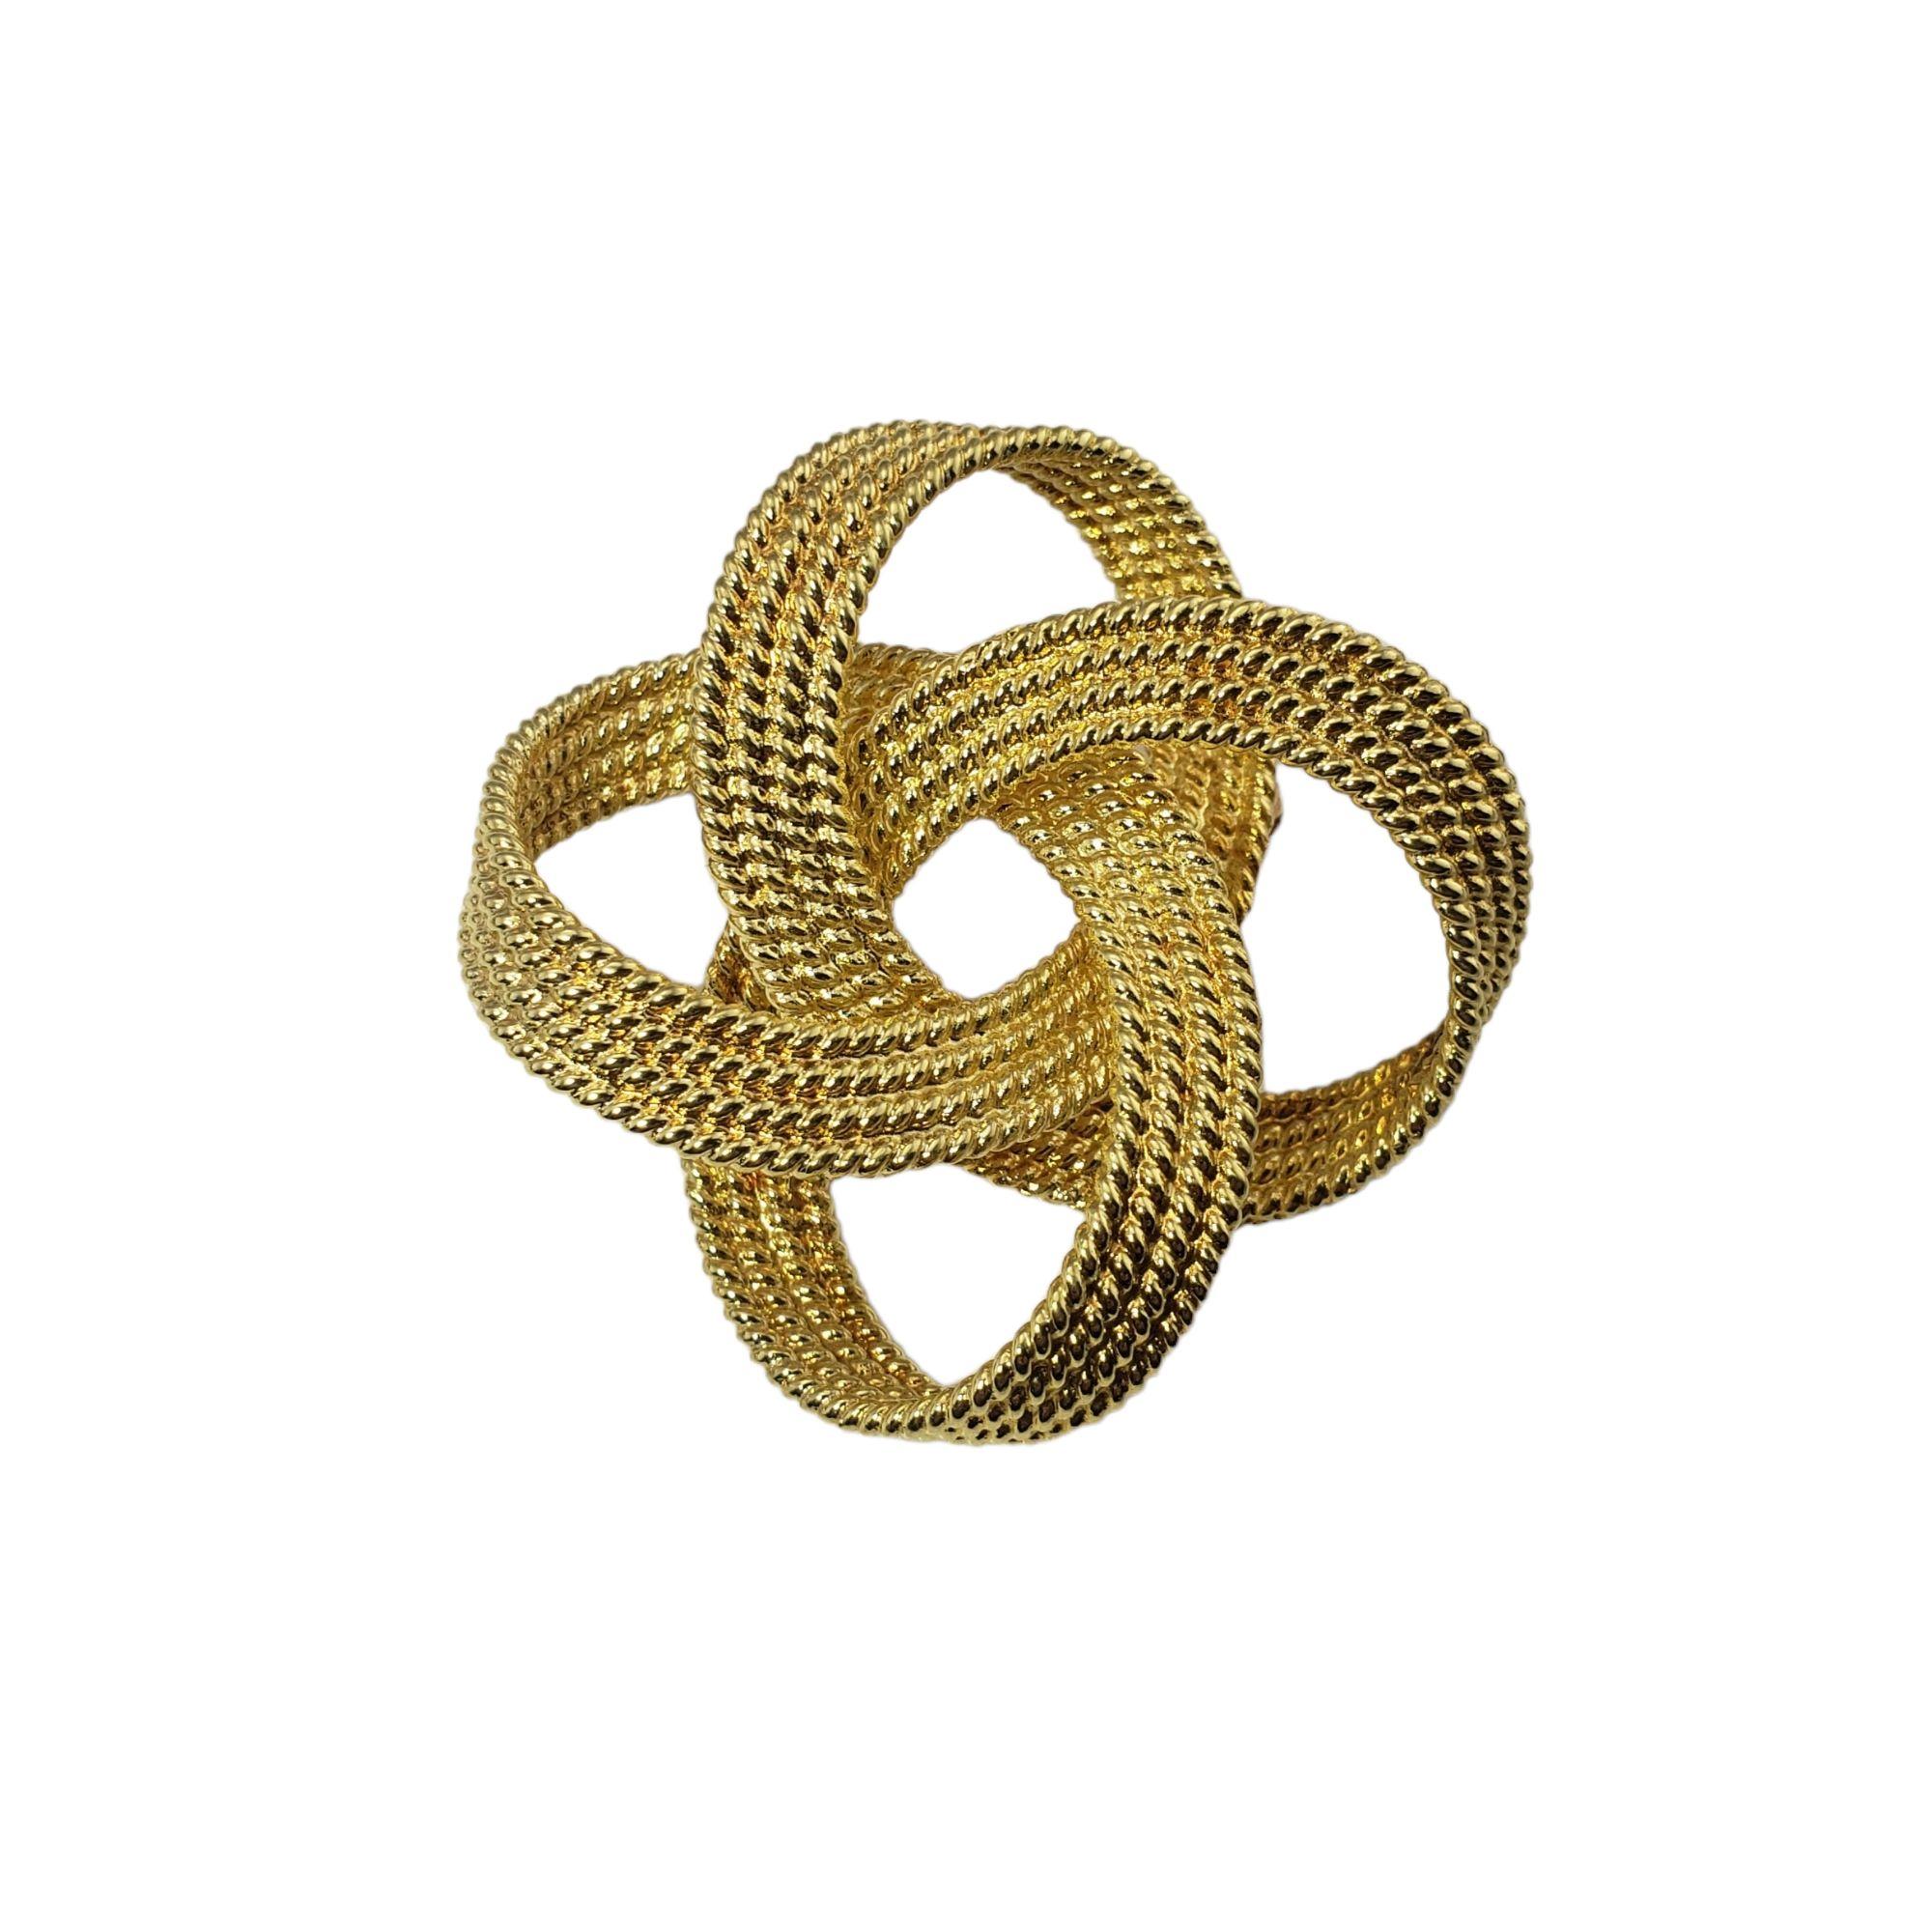 Tiffany & Co. 18 Karat Yellow Gold Knot Brooch / Pin For Sale 1